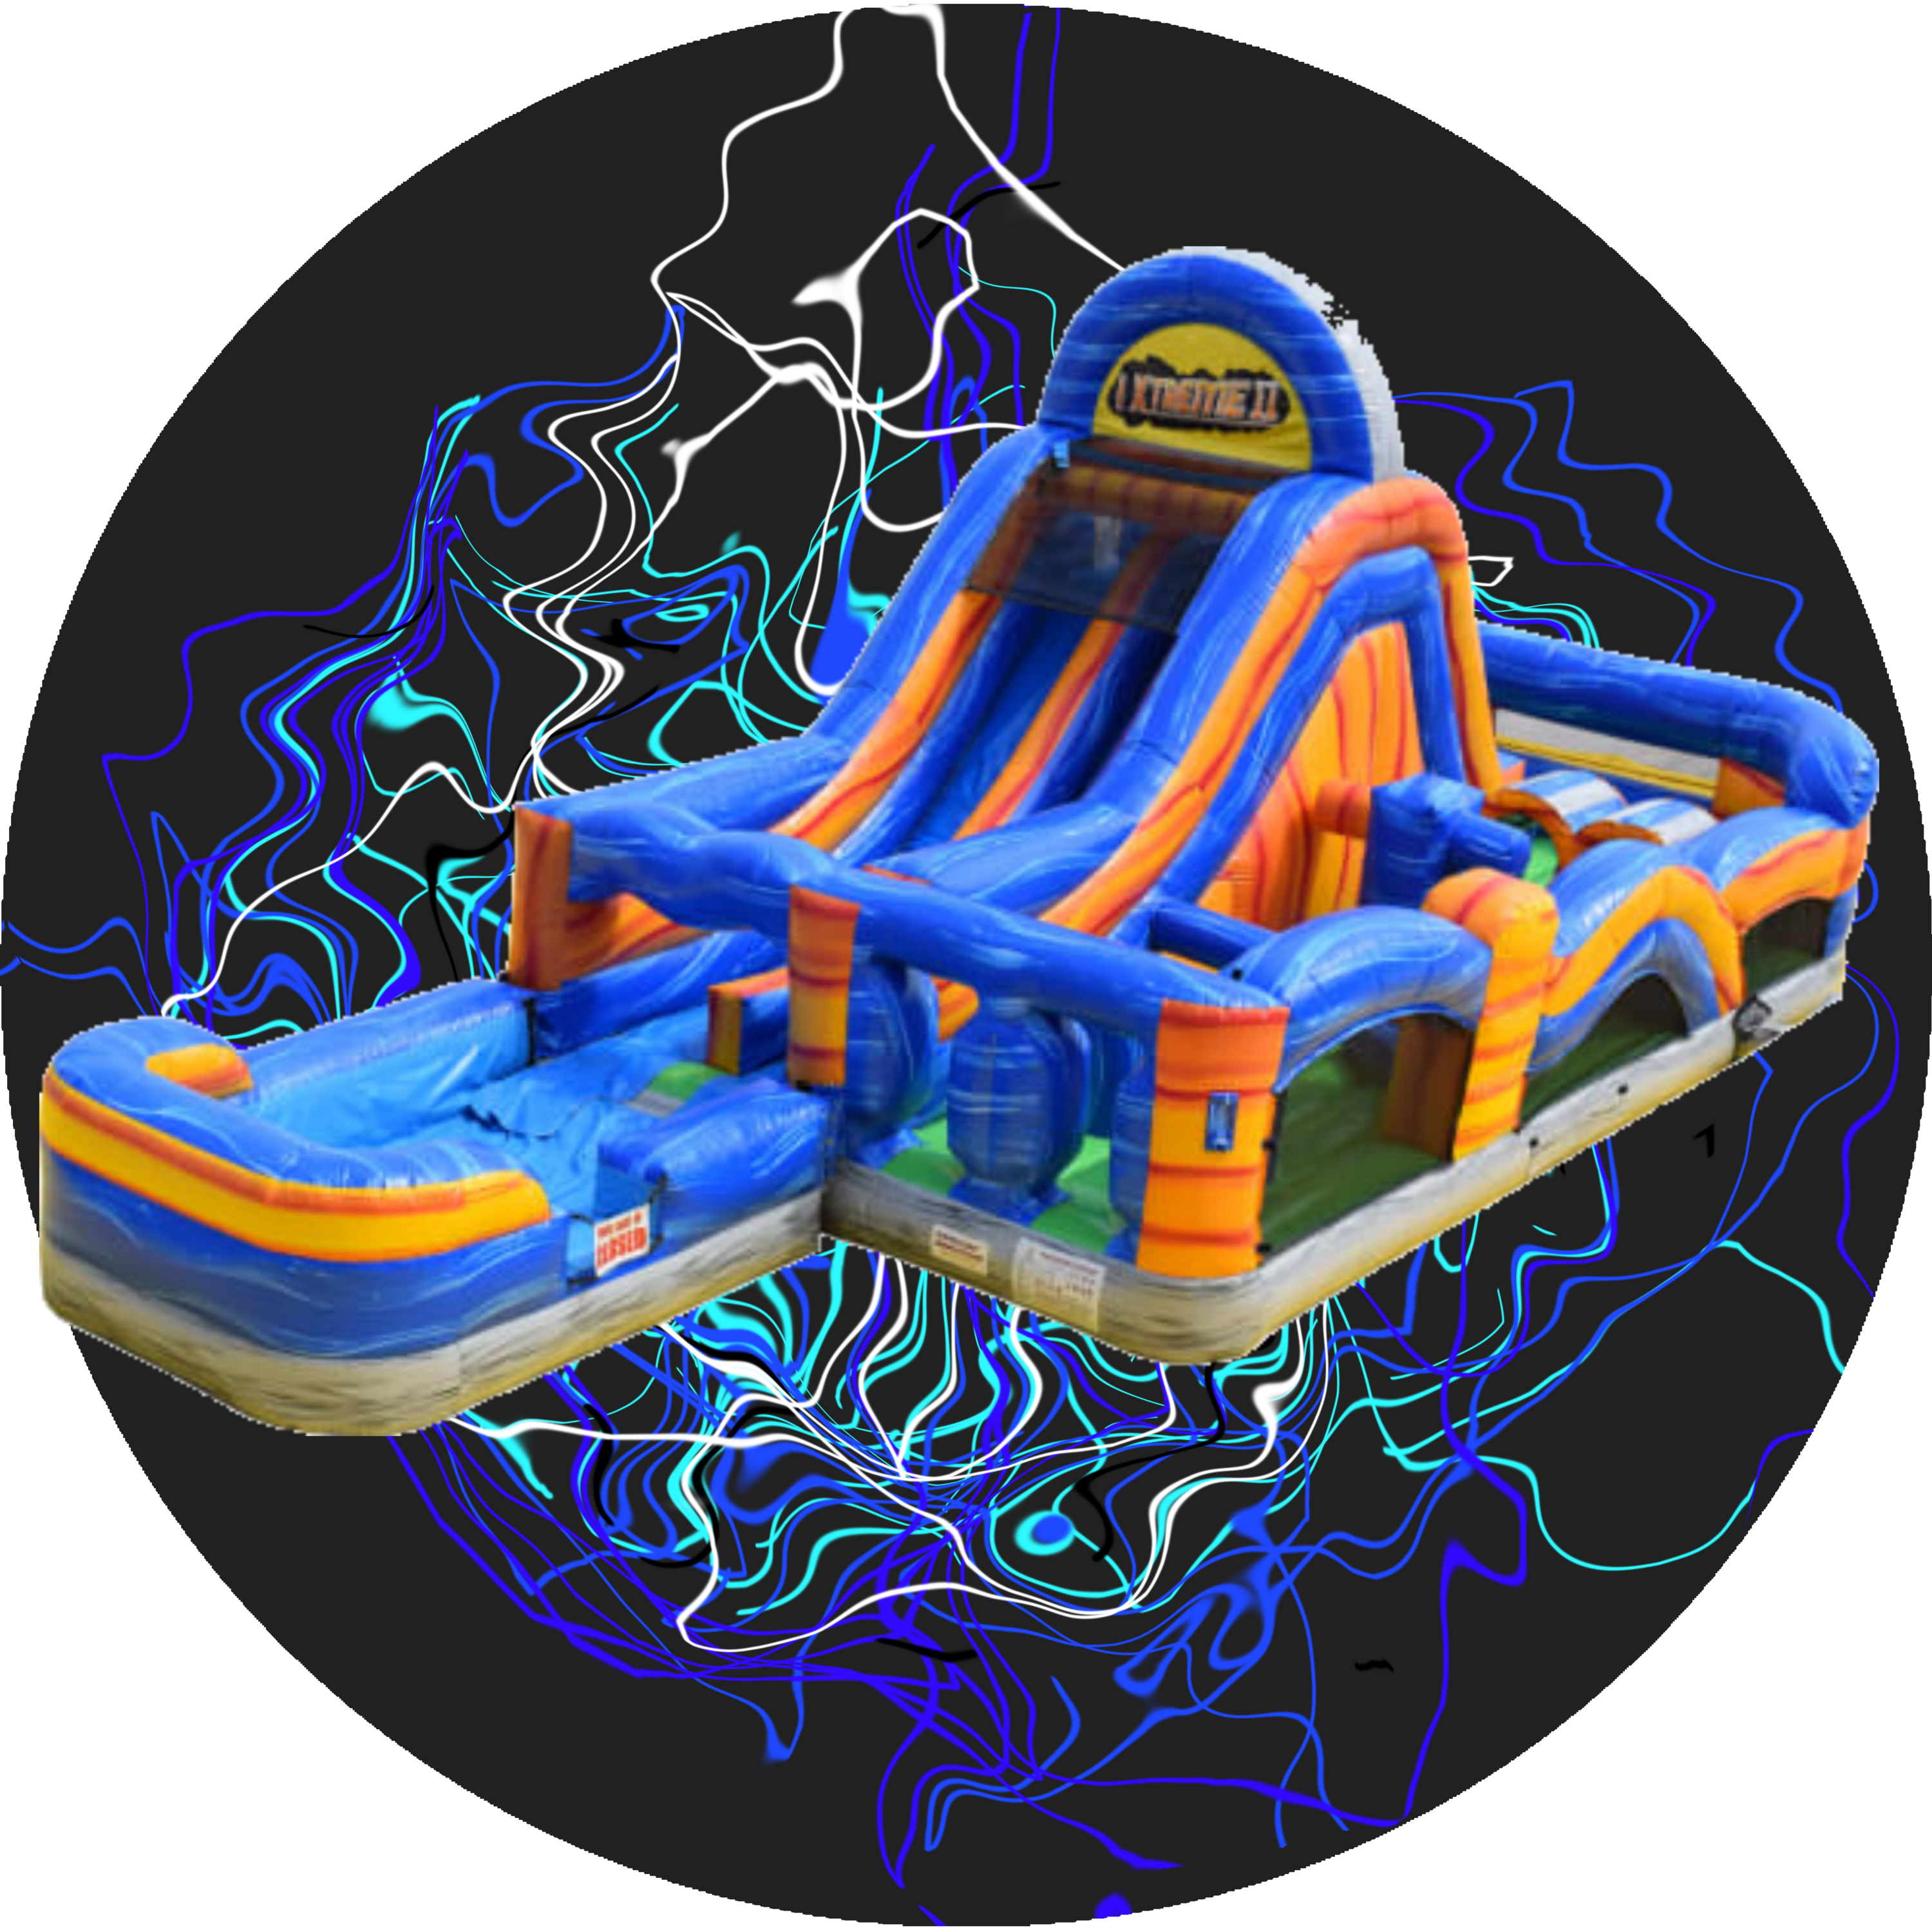 Austin Inflatable Obstacle